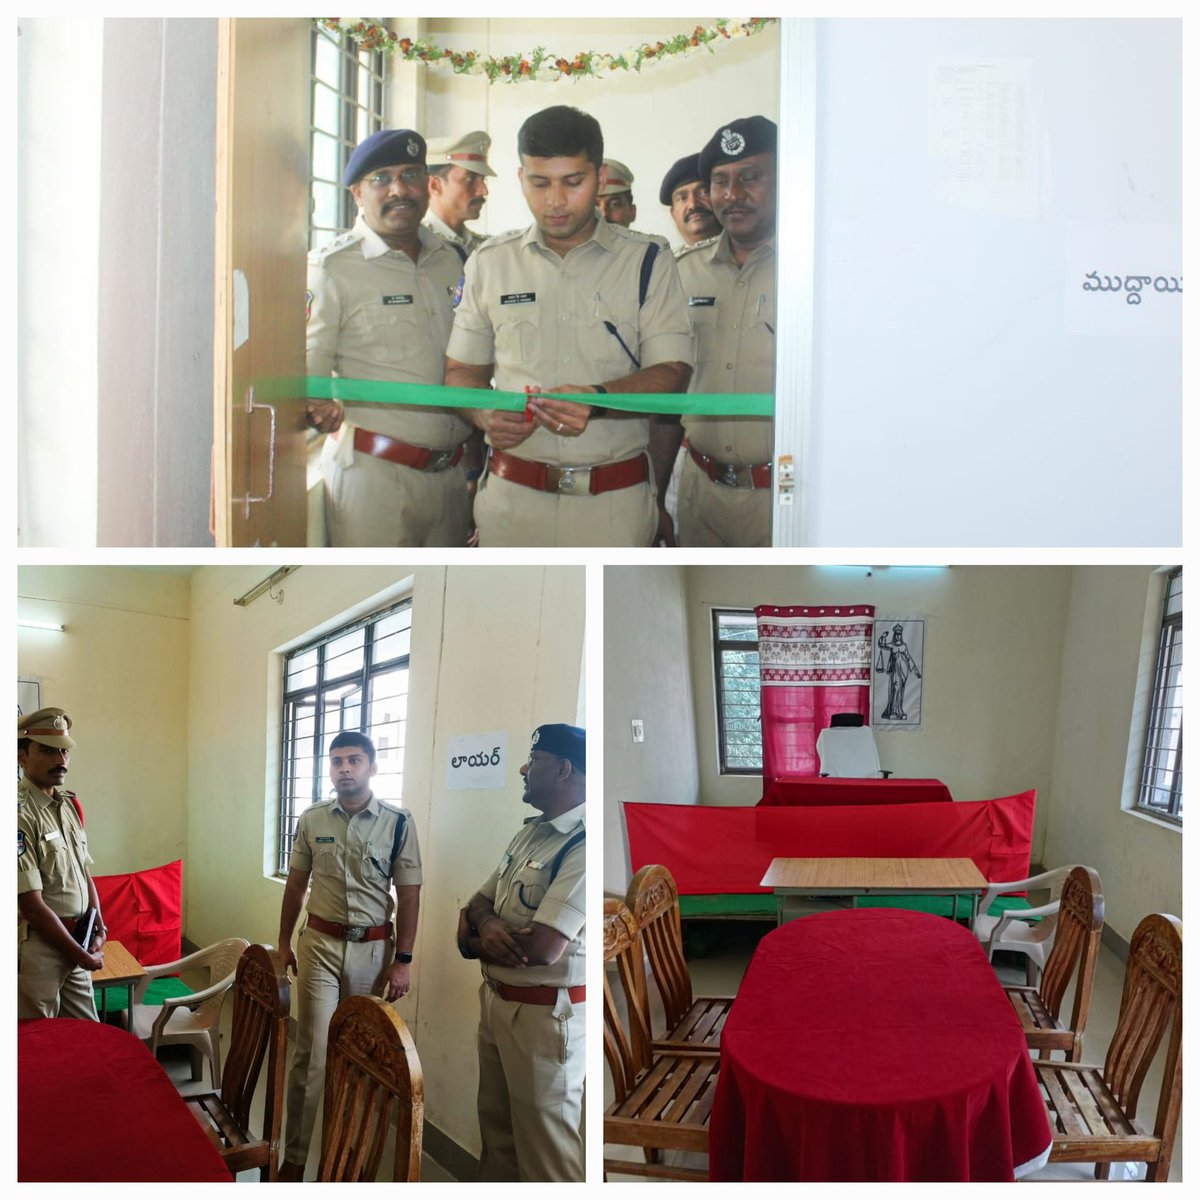 Inaugurated a #MockCourt at @psmhbdtown to familiarise witnesses to the court atmosphere. This will be used to #Simulate #Trials for better preparation and ensure #Conviction. @TelanganaDGP @TelanganaCOPs @Collector_MBD @AclbMahabubabad @sdpomahabubabad @mhbdpolice